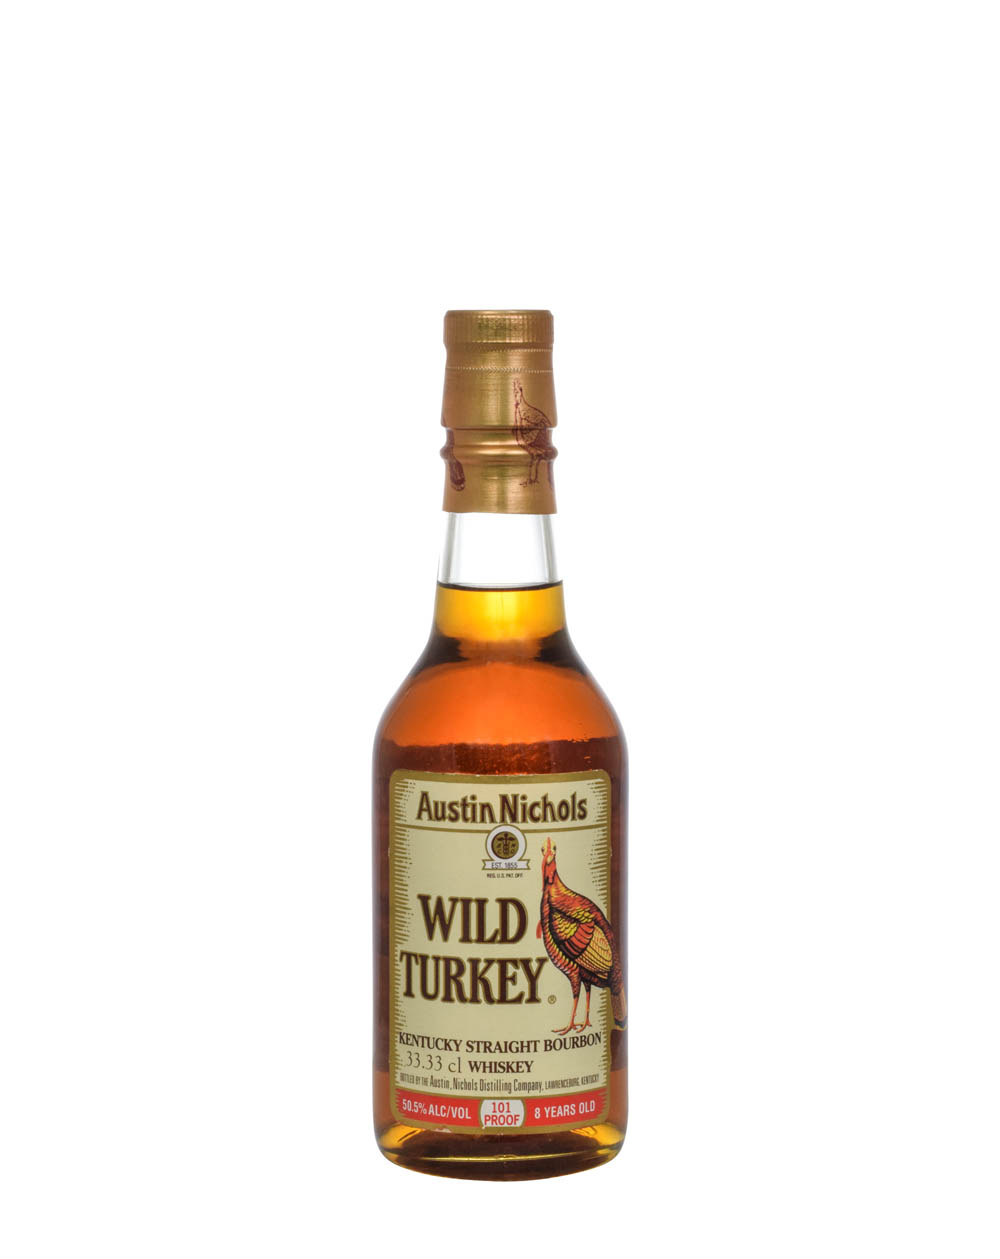 Wild Turkey 8 Years Old 101 Proof 33.33cl 1995 Must Have Malts MHM